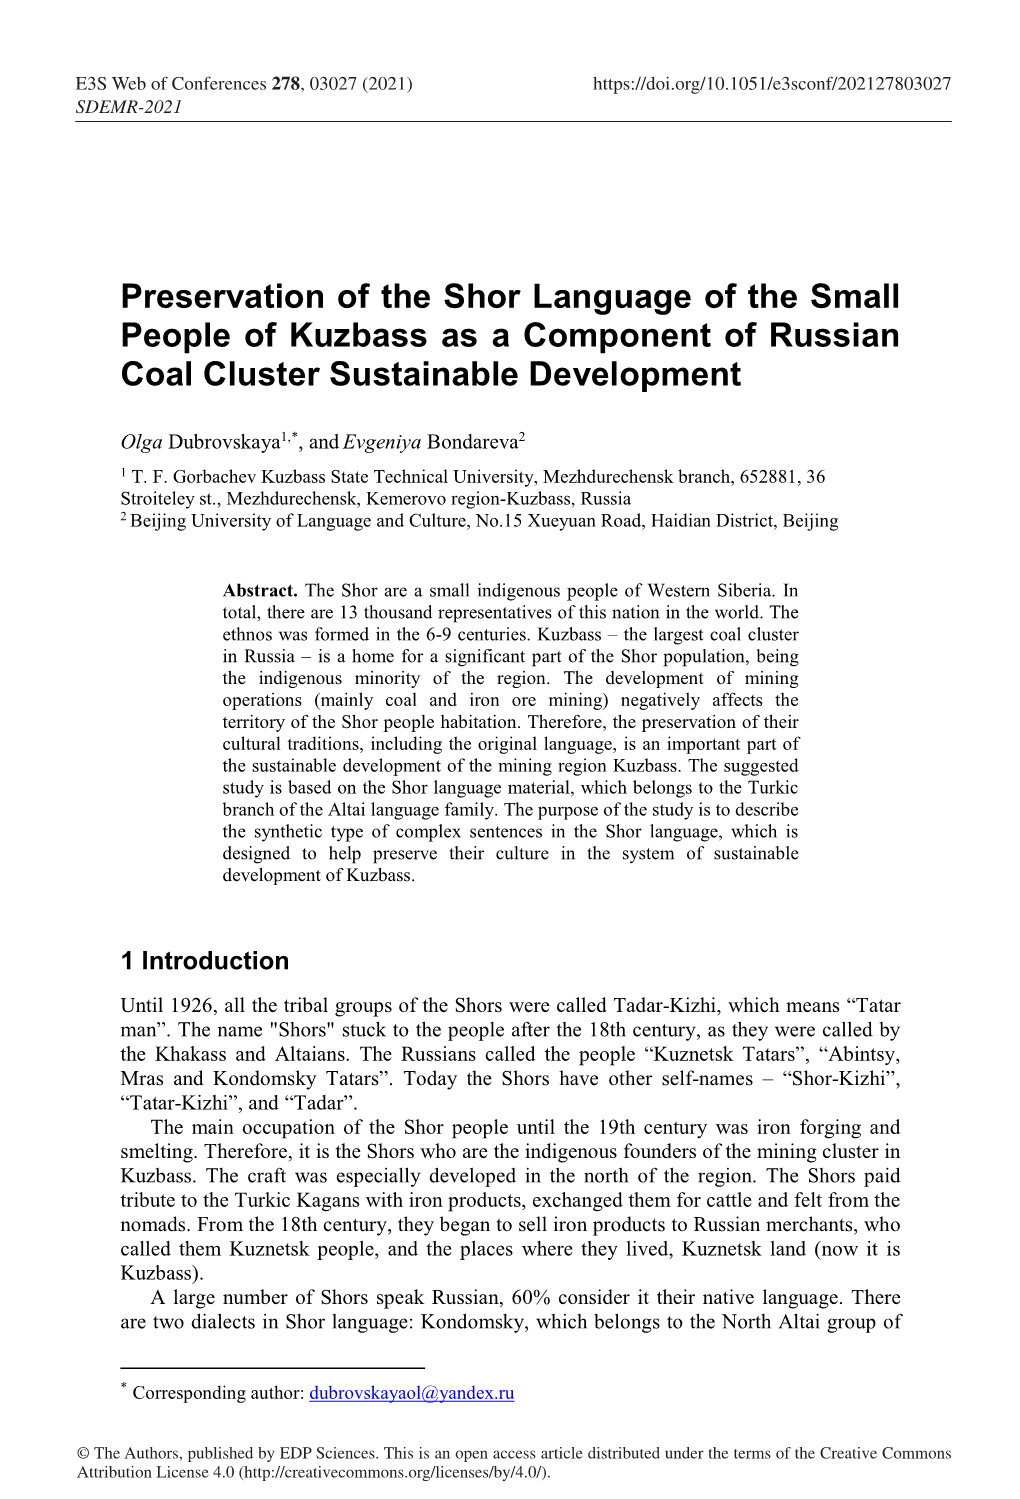 Preservation of the Shor Language of the Small People of Kuzbass As a Component of Russian Coal Cluster Sustainable Development